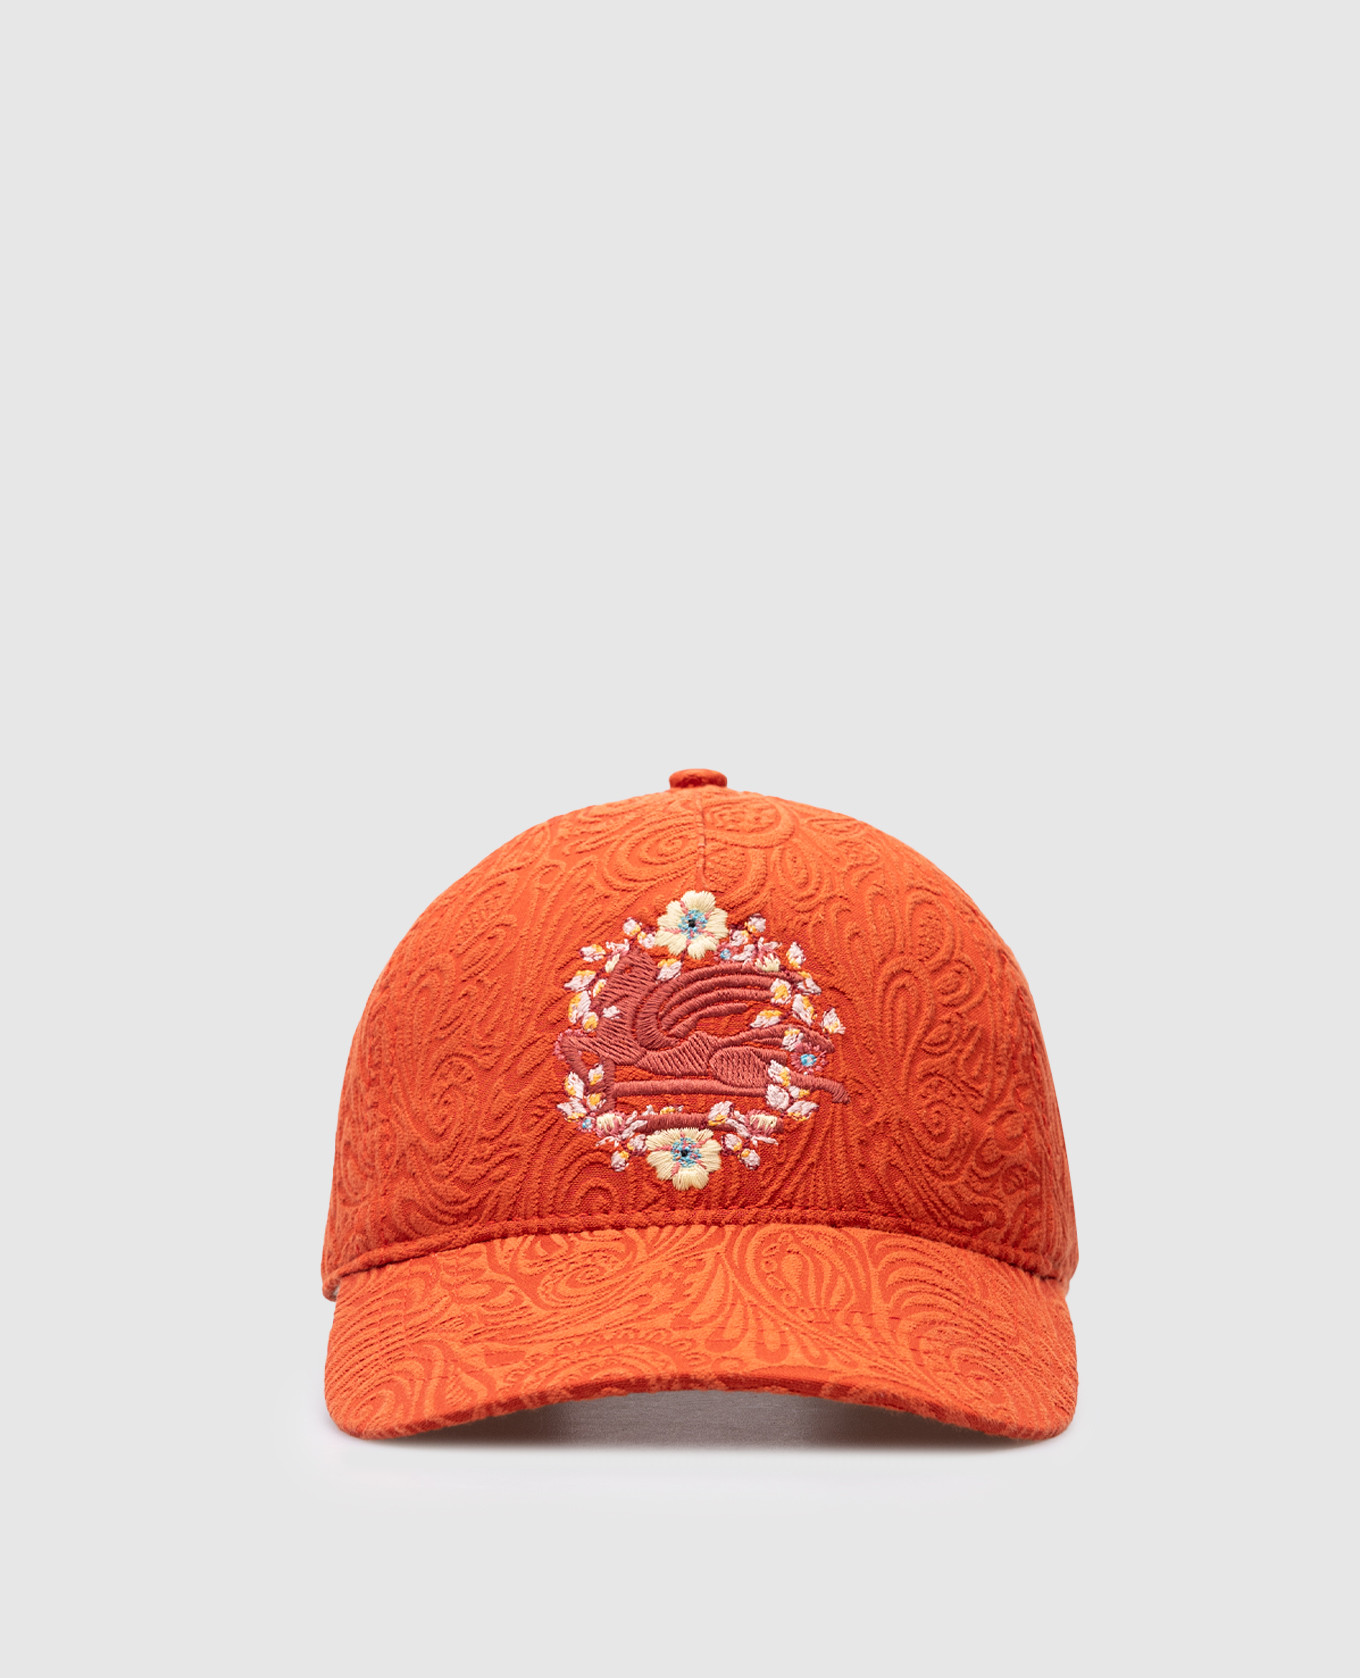 Orange paisley cap with floral logo embroidery